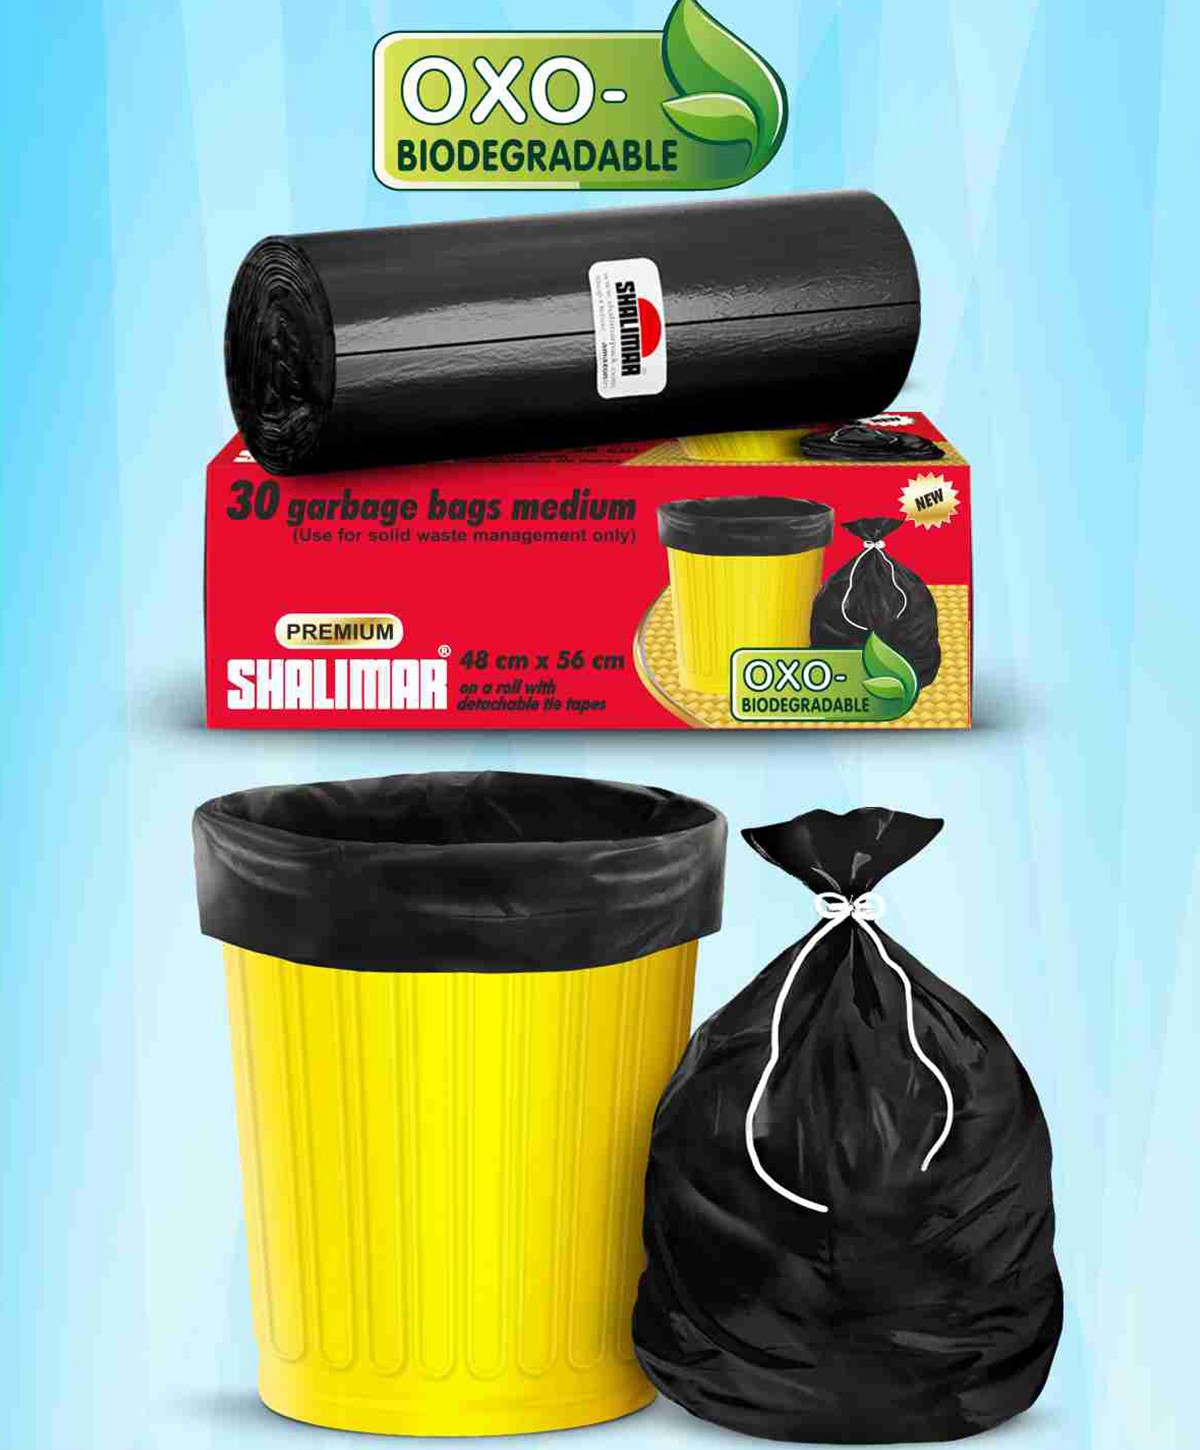 Clean Home Biodegradable Garbage Bags for Dustbin waste Disposal 4 Packs, 30 Bags in Each Pack